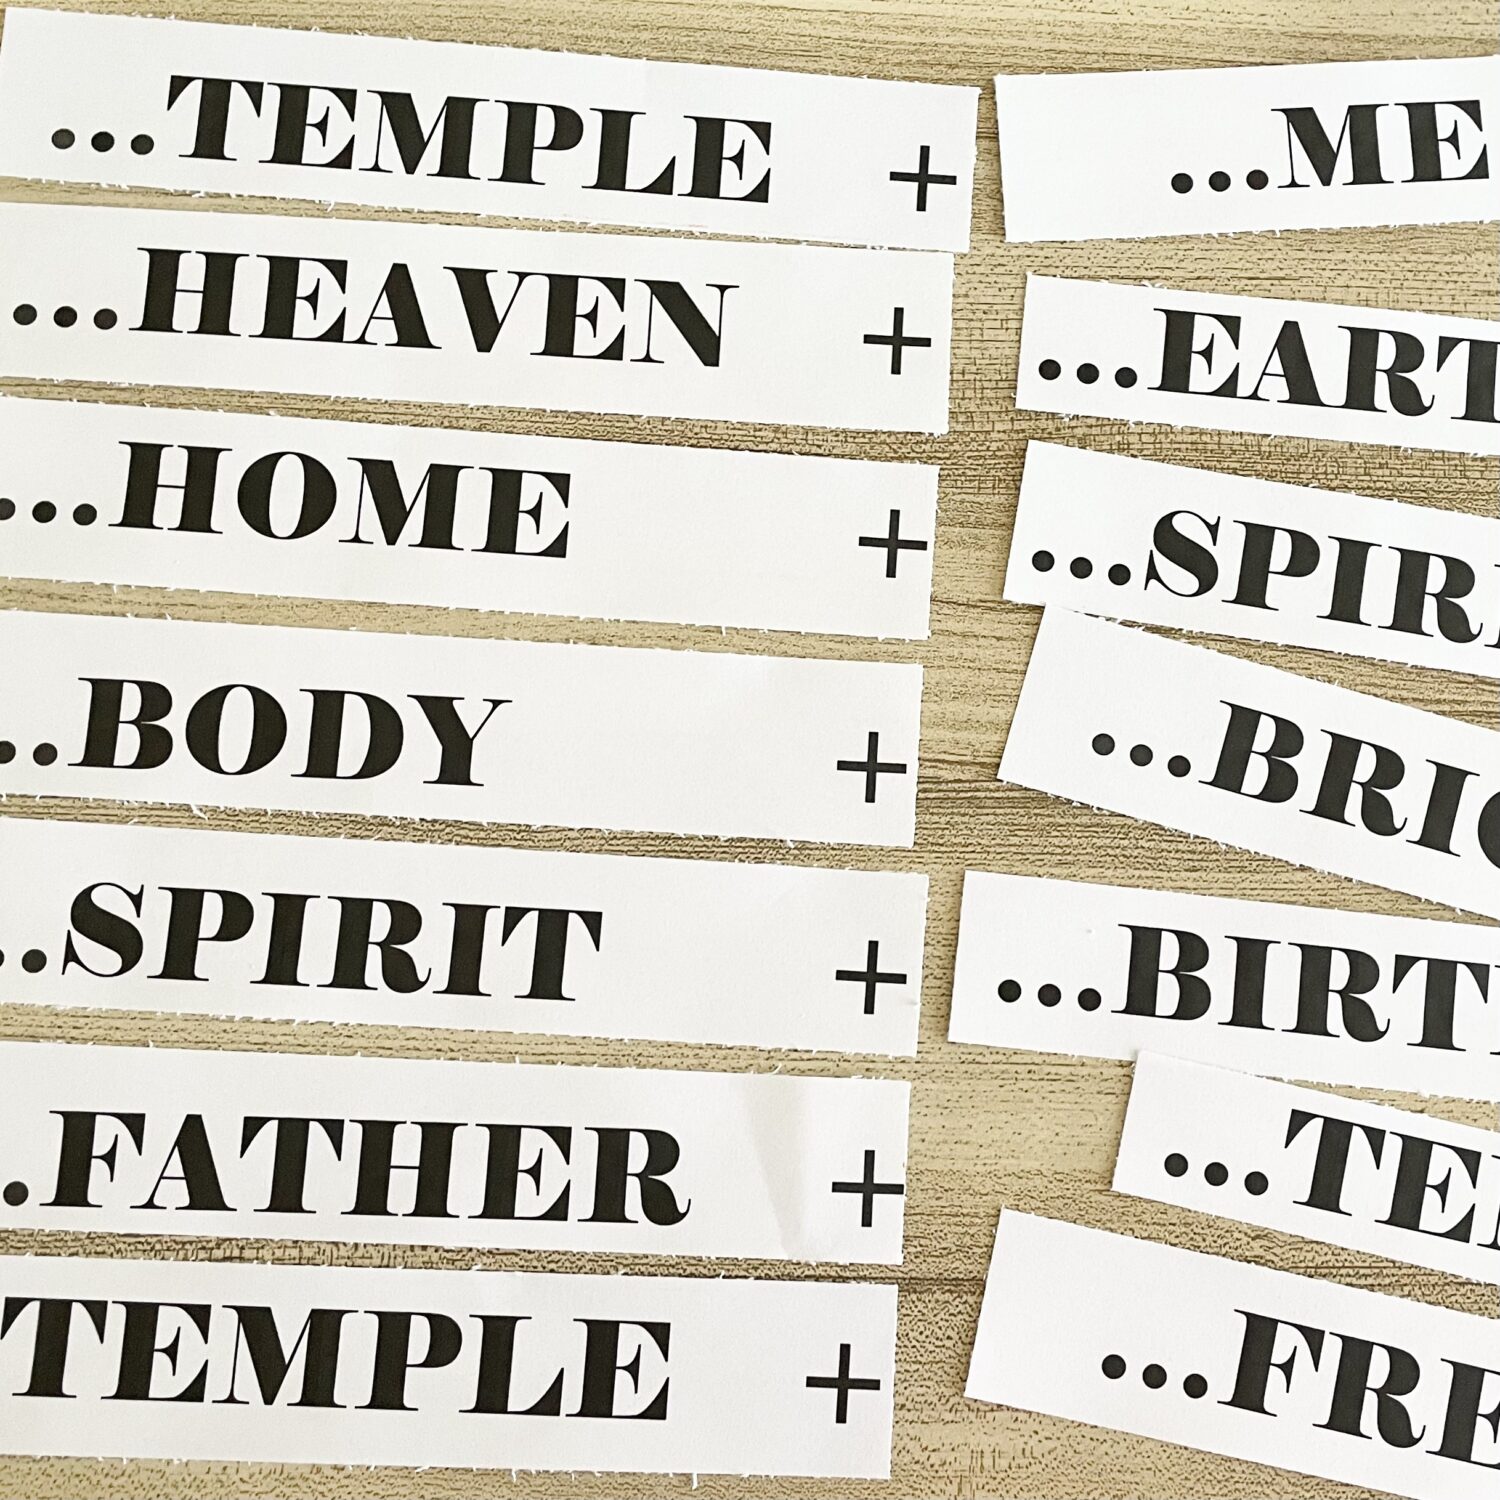 The Lord Gave Me a Temple Keyword Match! Use this fun, logical matching activity to review this song. Match keywords at beginning and end of phrases. Printable matching game for LDS Primary Music Leaders.